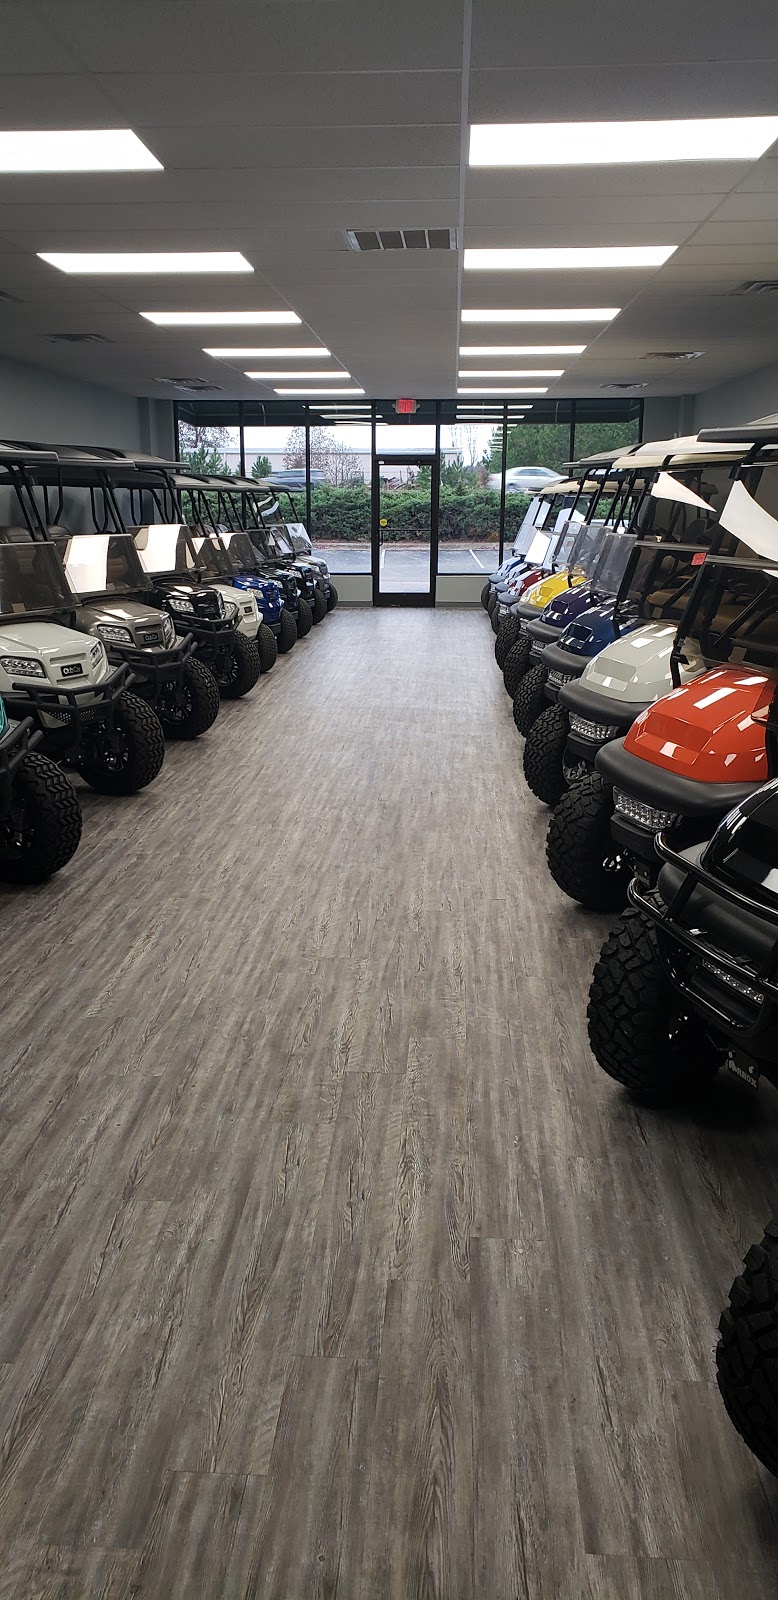 Under the Sun Golf Cars Capital Blvd | 225 Weathers Street, Capital Blvd, Youngsville, NC 27596 | Phone: (919) 569-7548